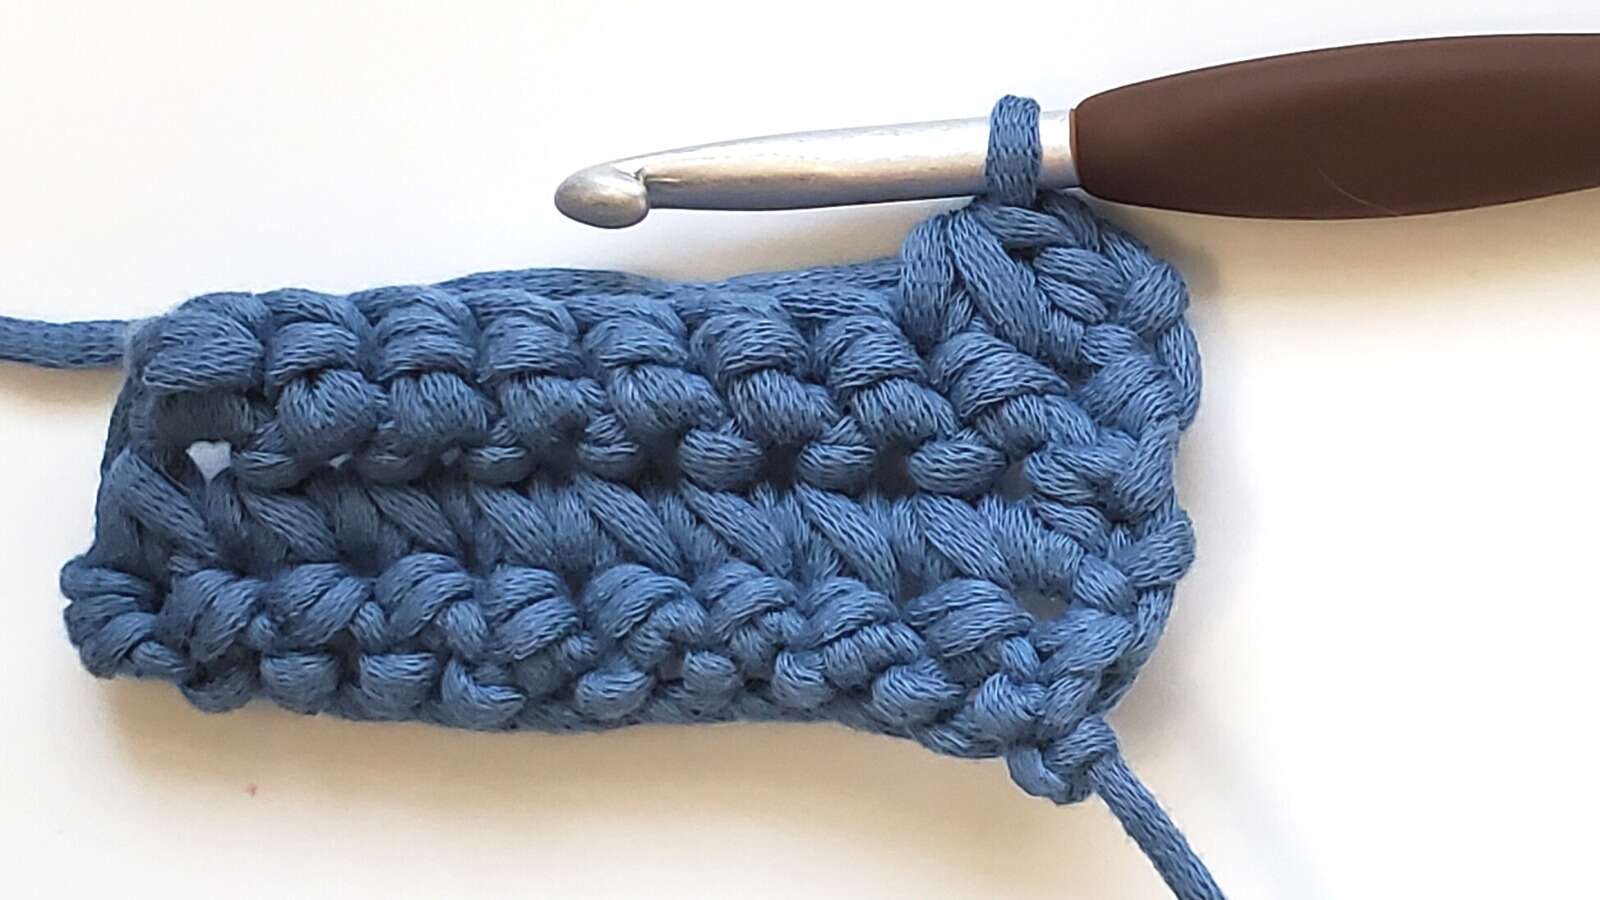 A completed paired single crochet stitch